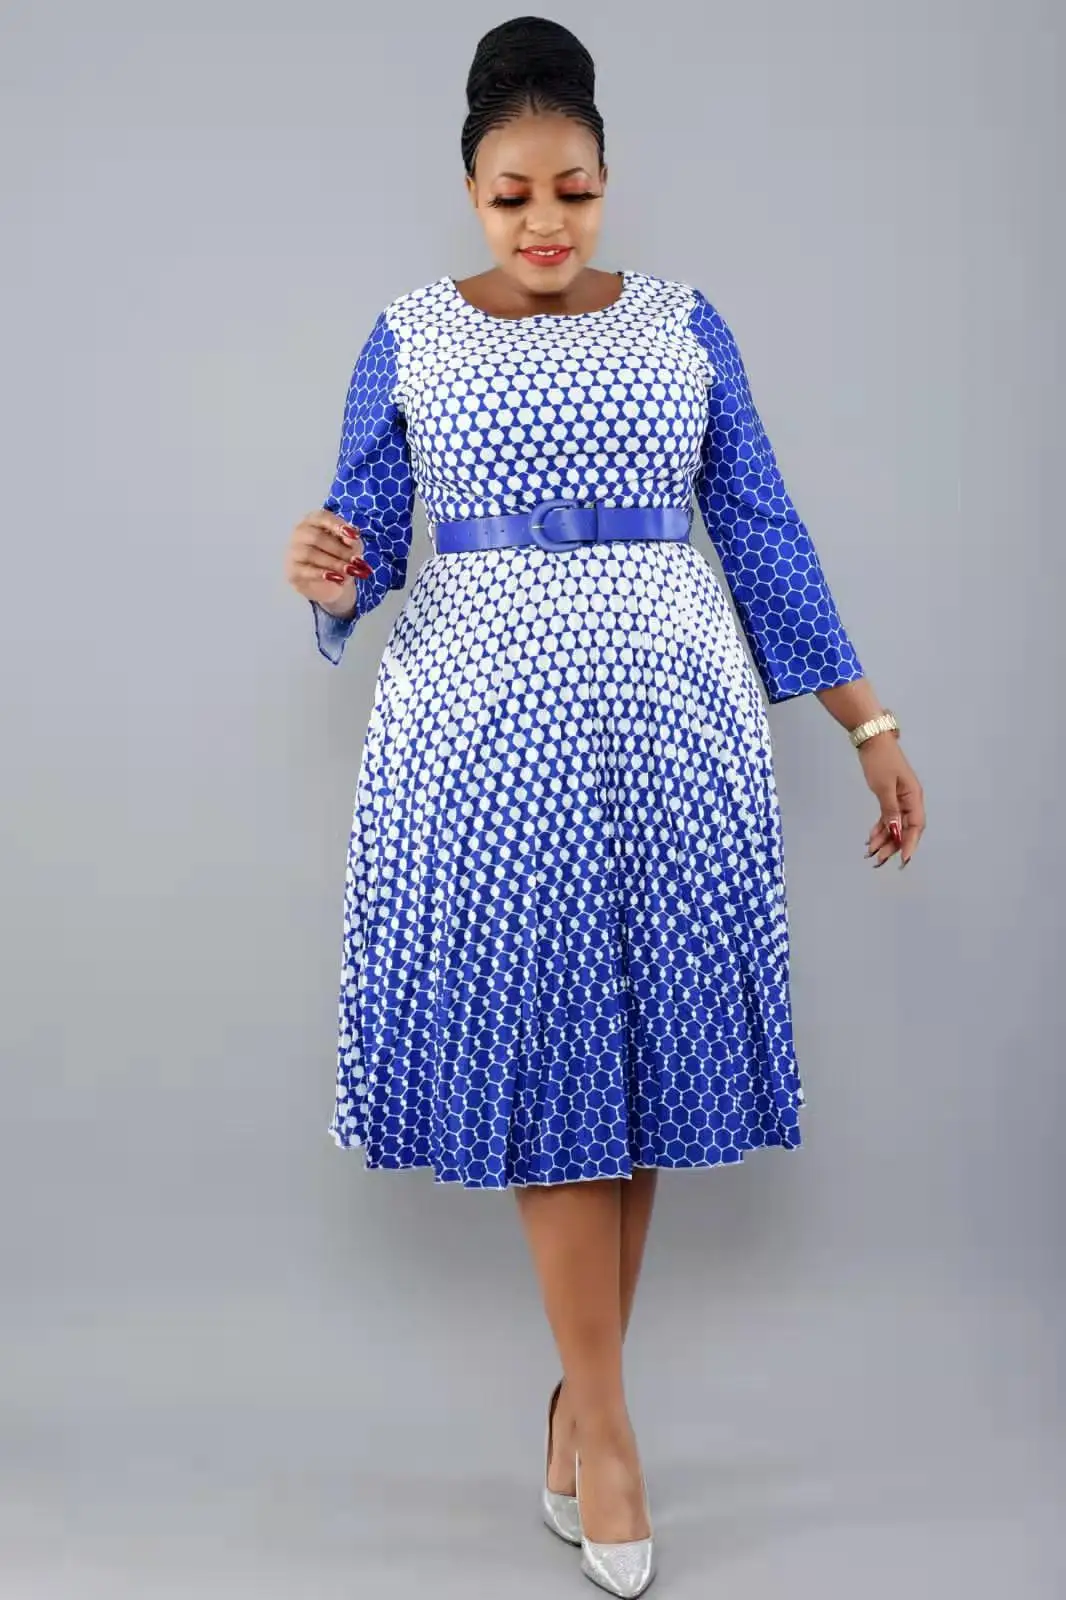 african style clothing African women's spring and autumn plus size slim patchwork lace dress elegant dress long dress African clothing  2XL-6XL african couple outfits